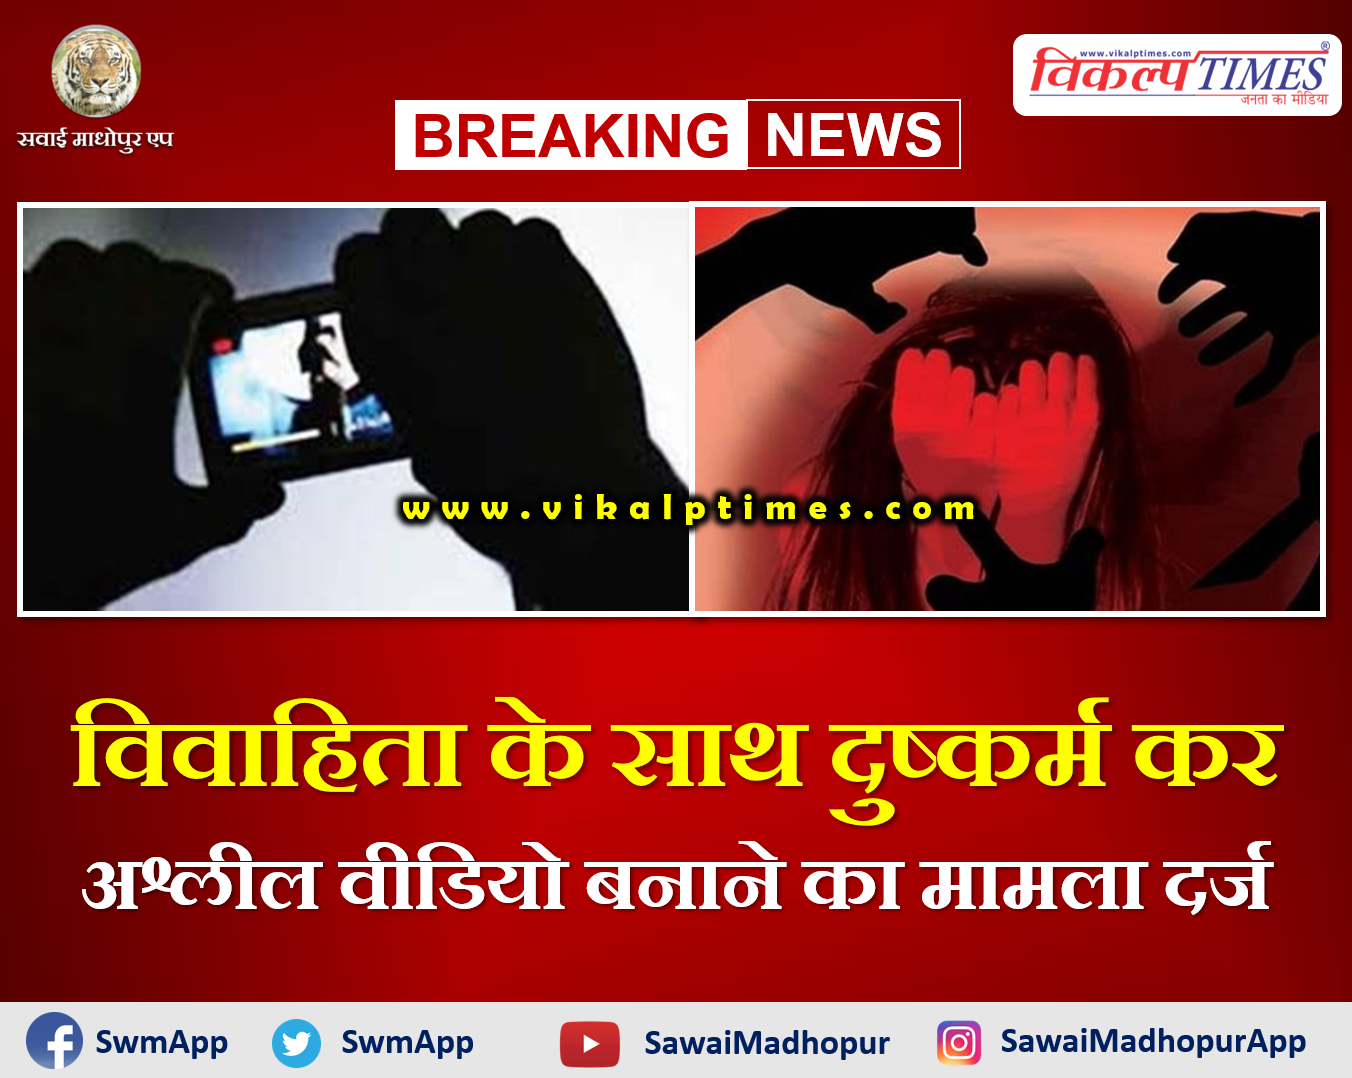 gangrape with married woman and making pornographic videos report filed in Sawai Madhopur